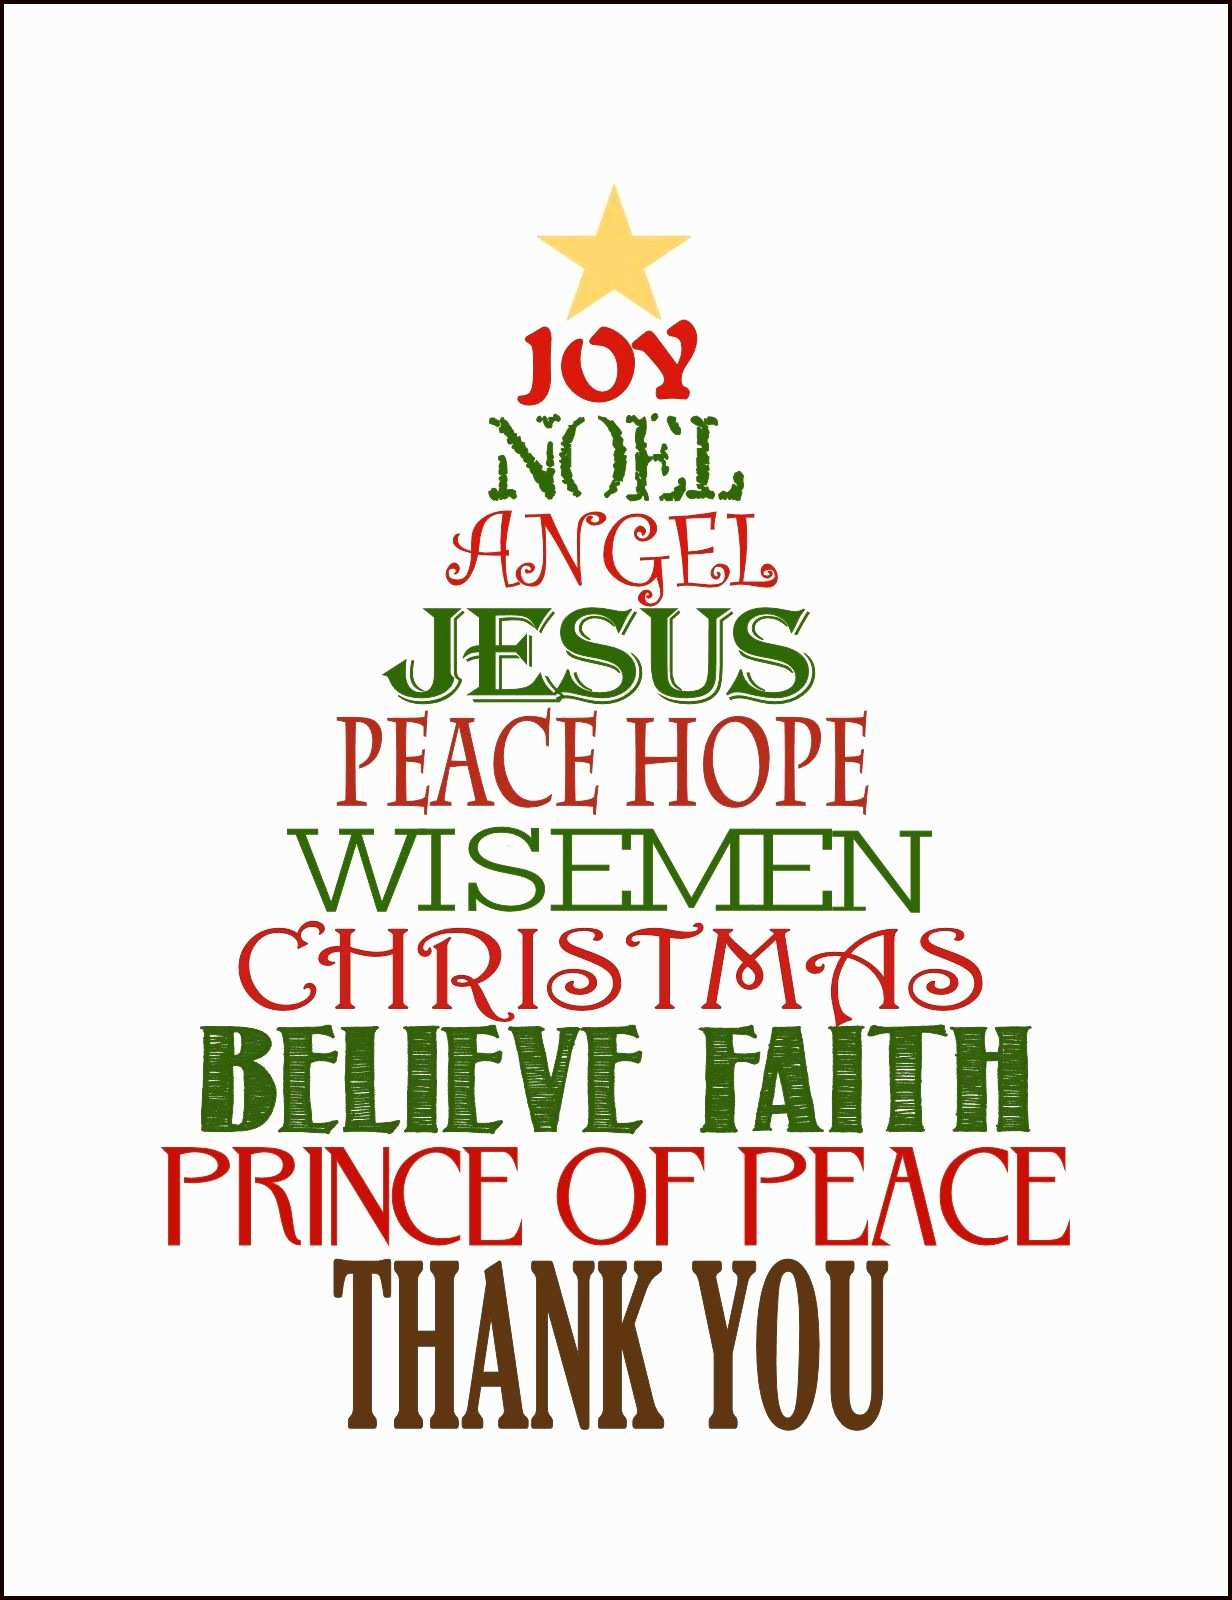 Free Printable Prayer Cards Joy Comes In The Morning - Classy World - Free Printable Christian Christmas Greeting Cards